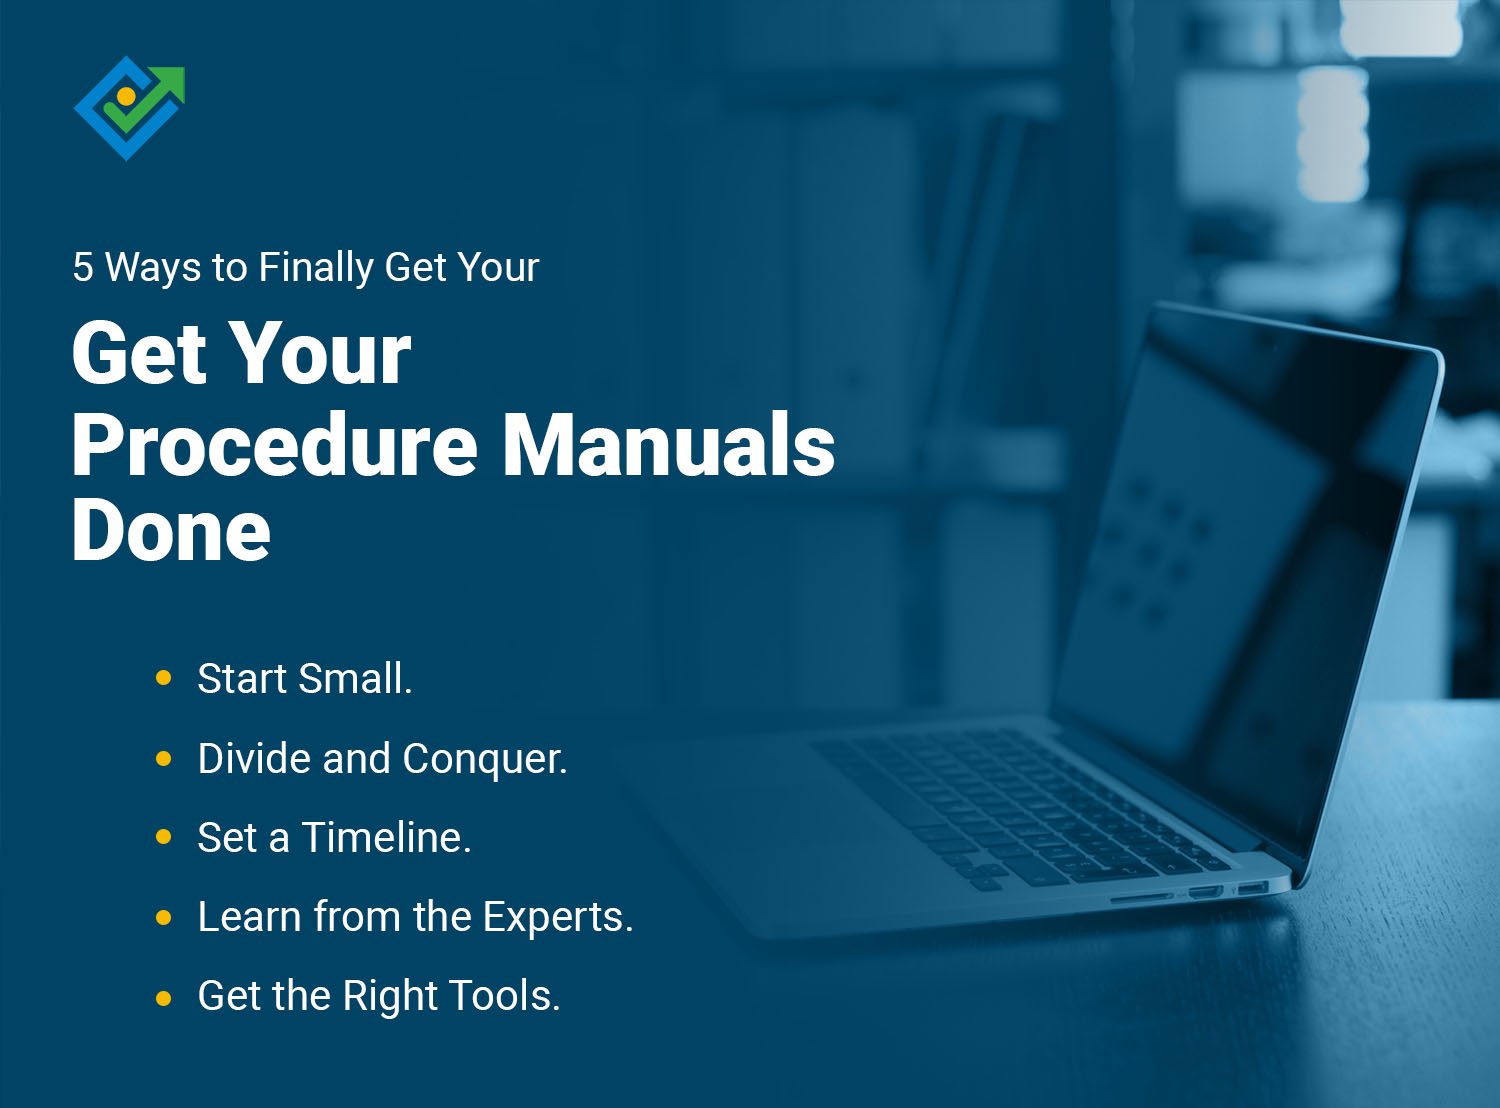 5 Ways to Finally Get Your Procedure Manuals Done blog graphic